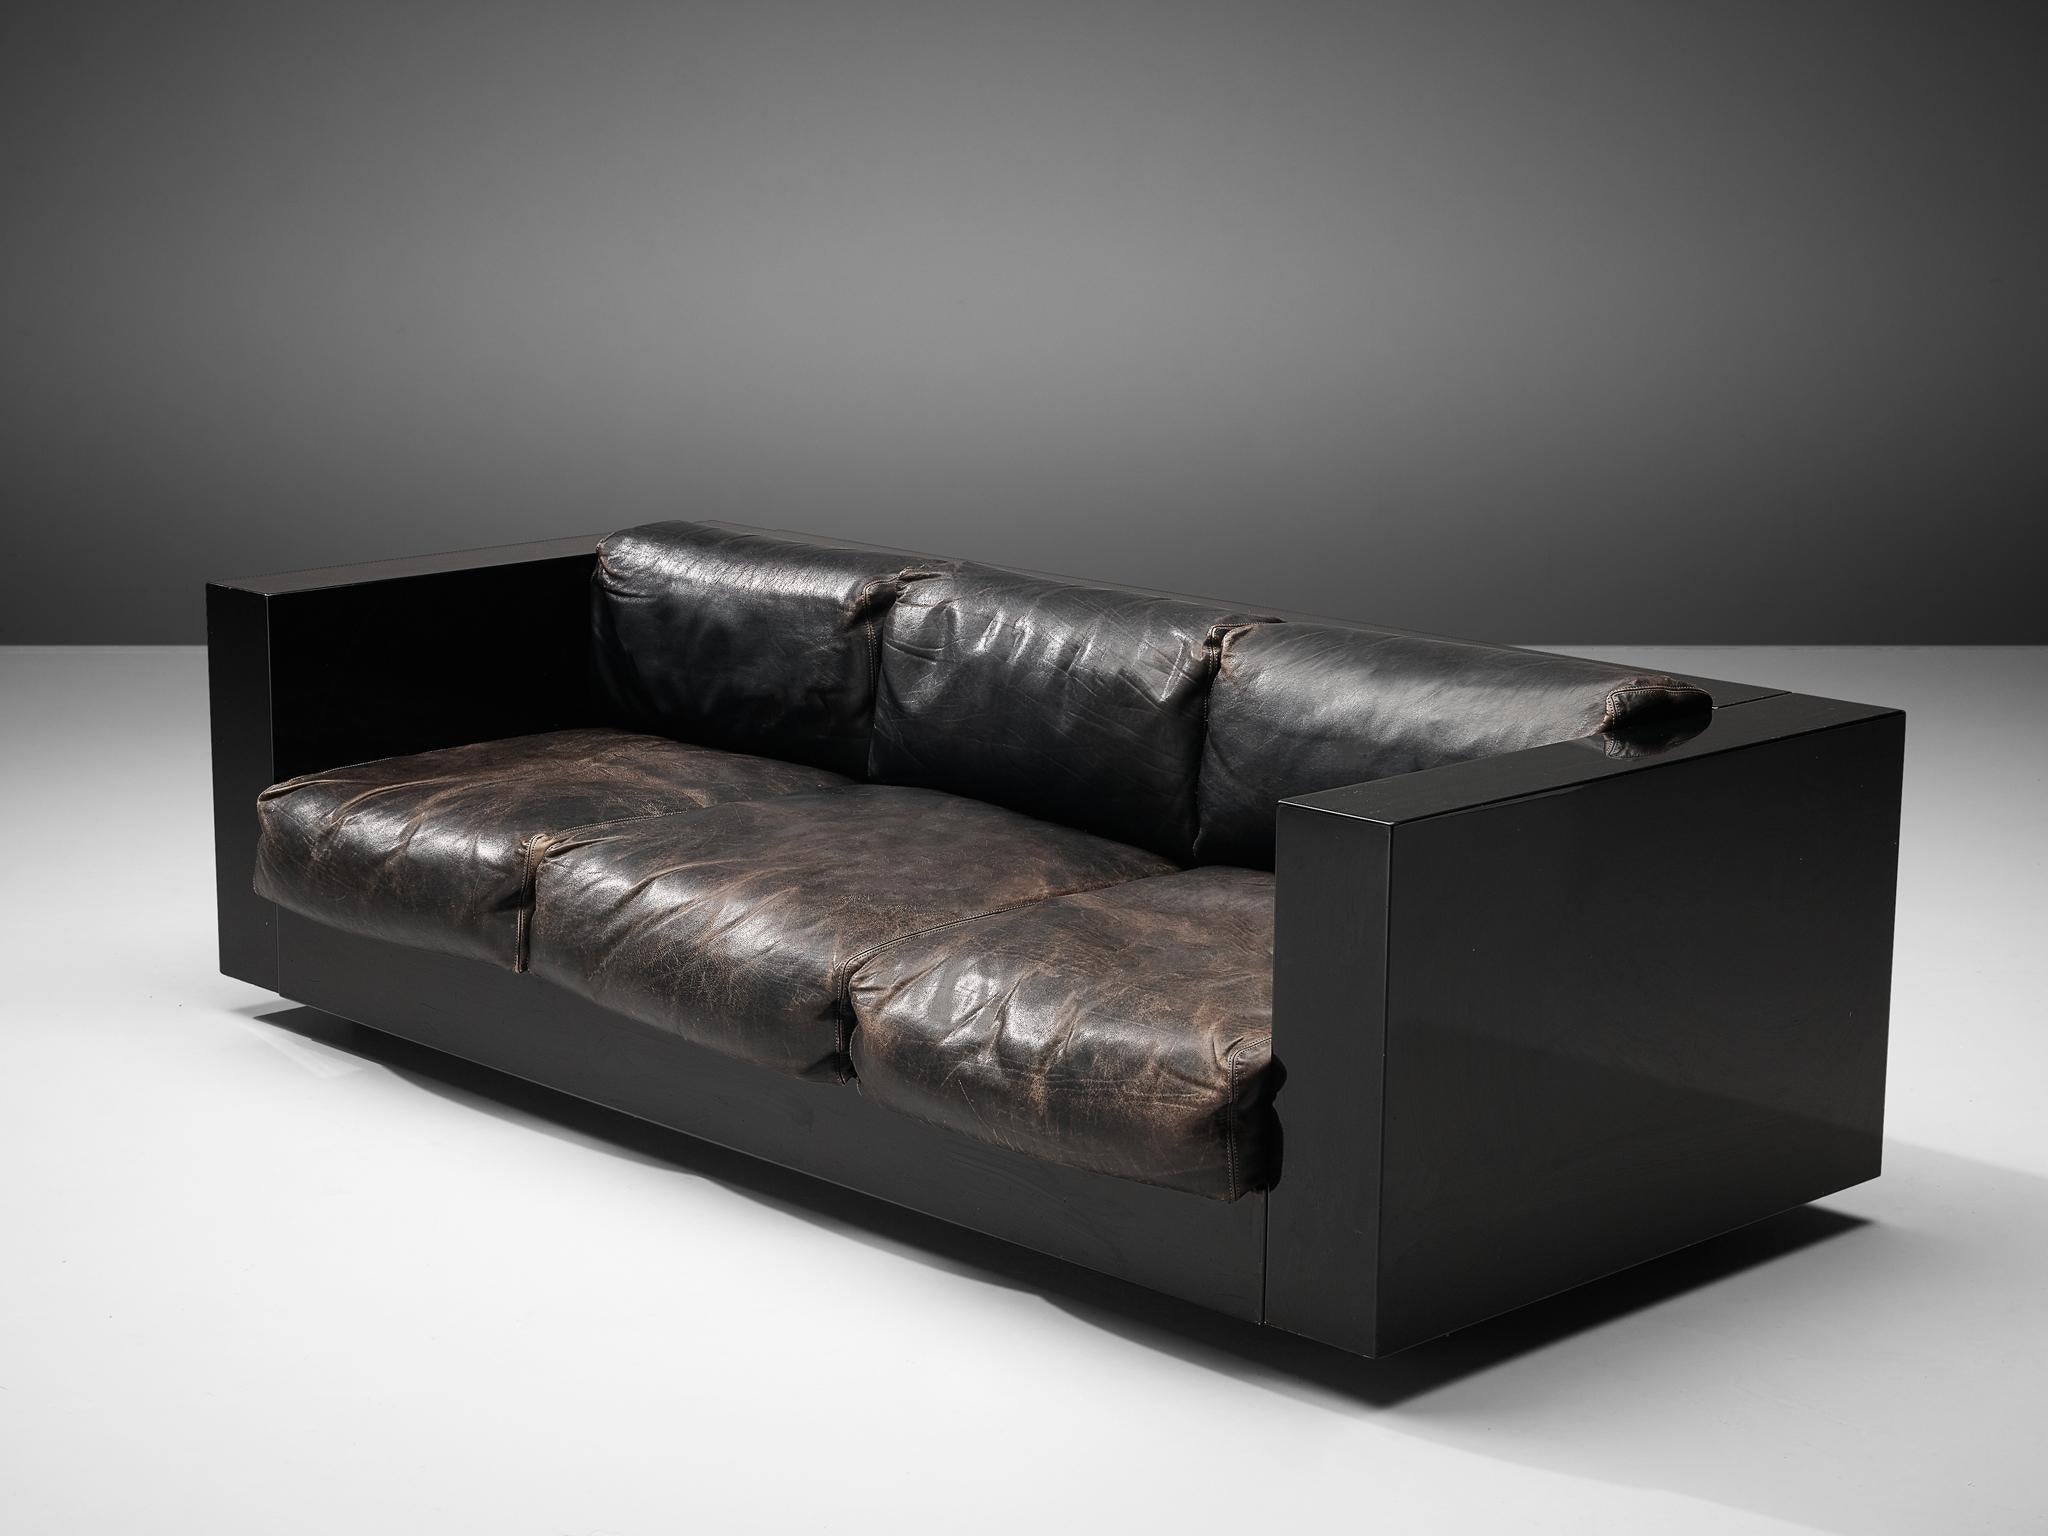 Vignelli Saratoga Large Black Sofa with Black Leather In Good Condition For Sale In Waalwijk, NL